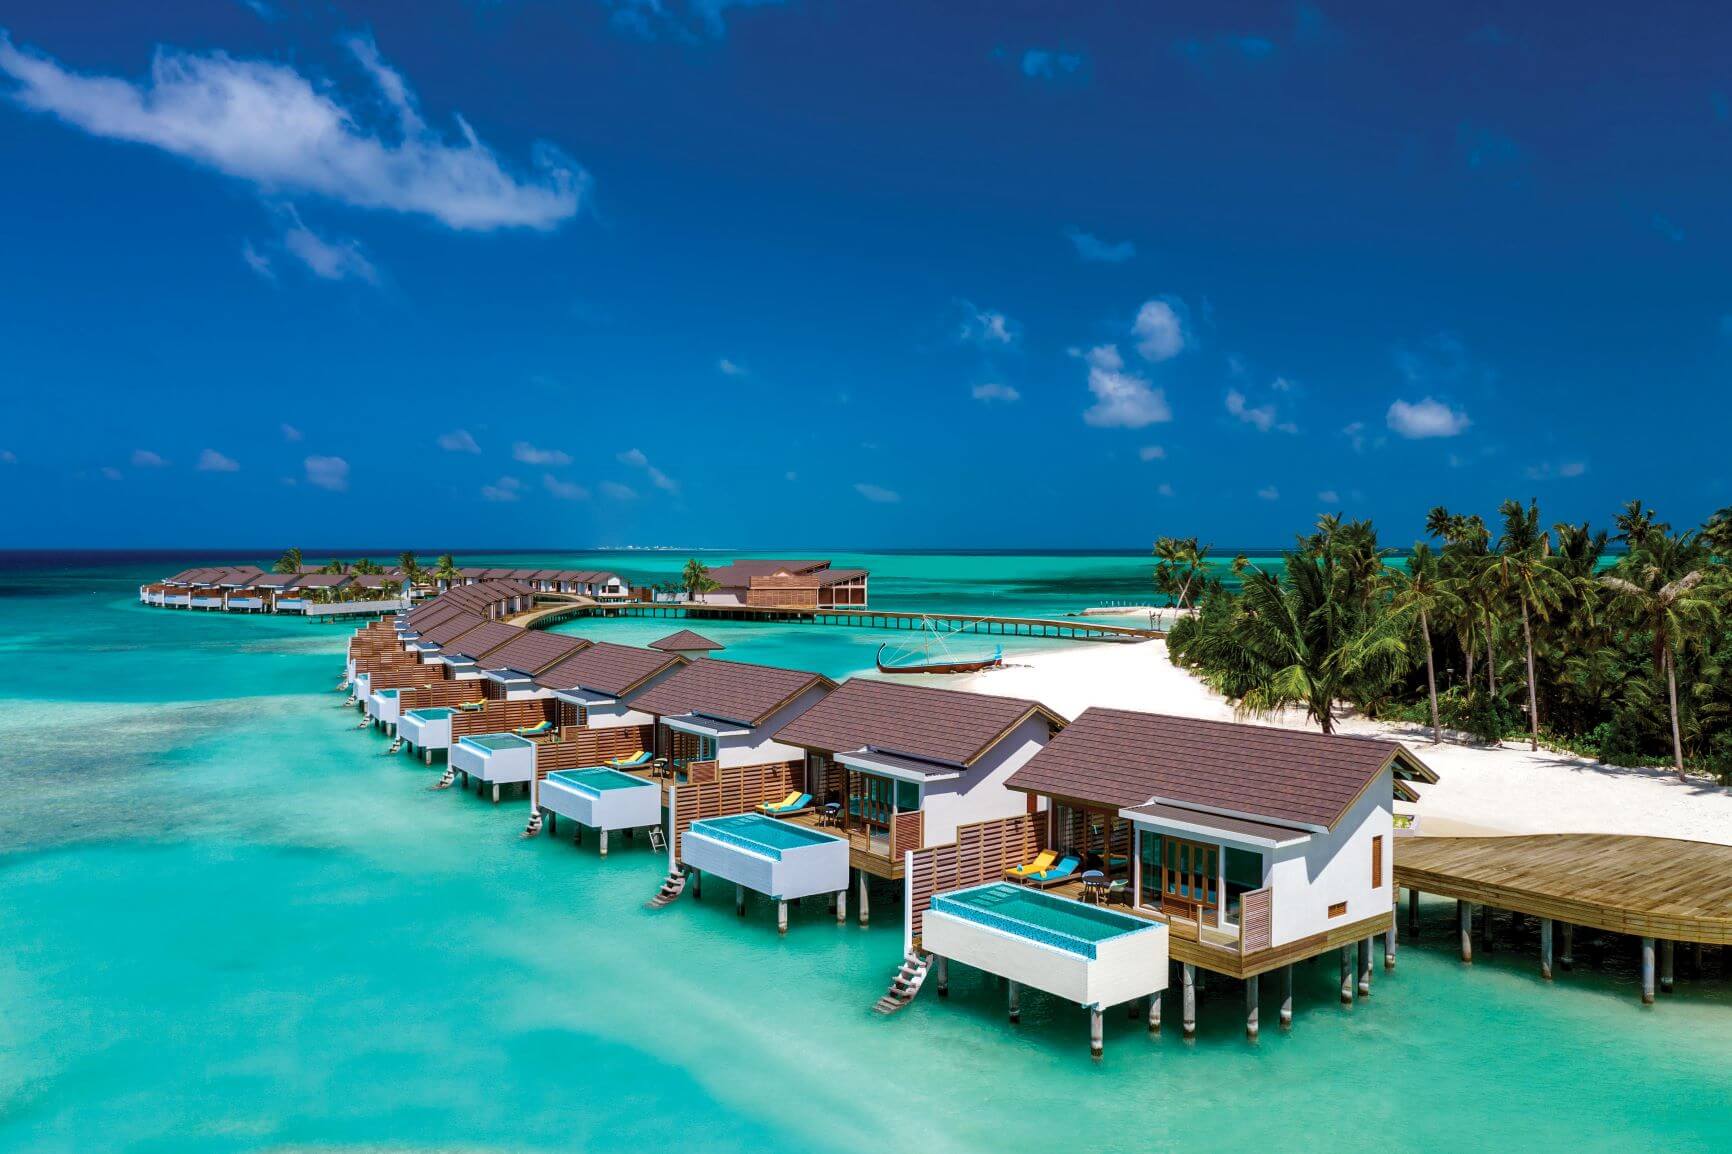 Atmosphere Kaniushi is one of the best Maldives overwater resorts